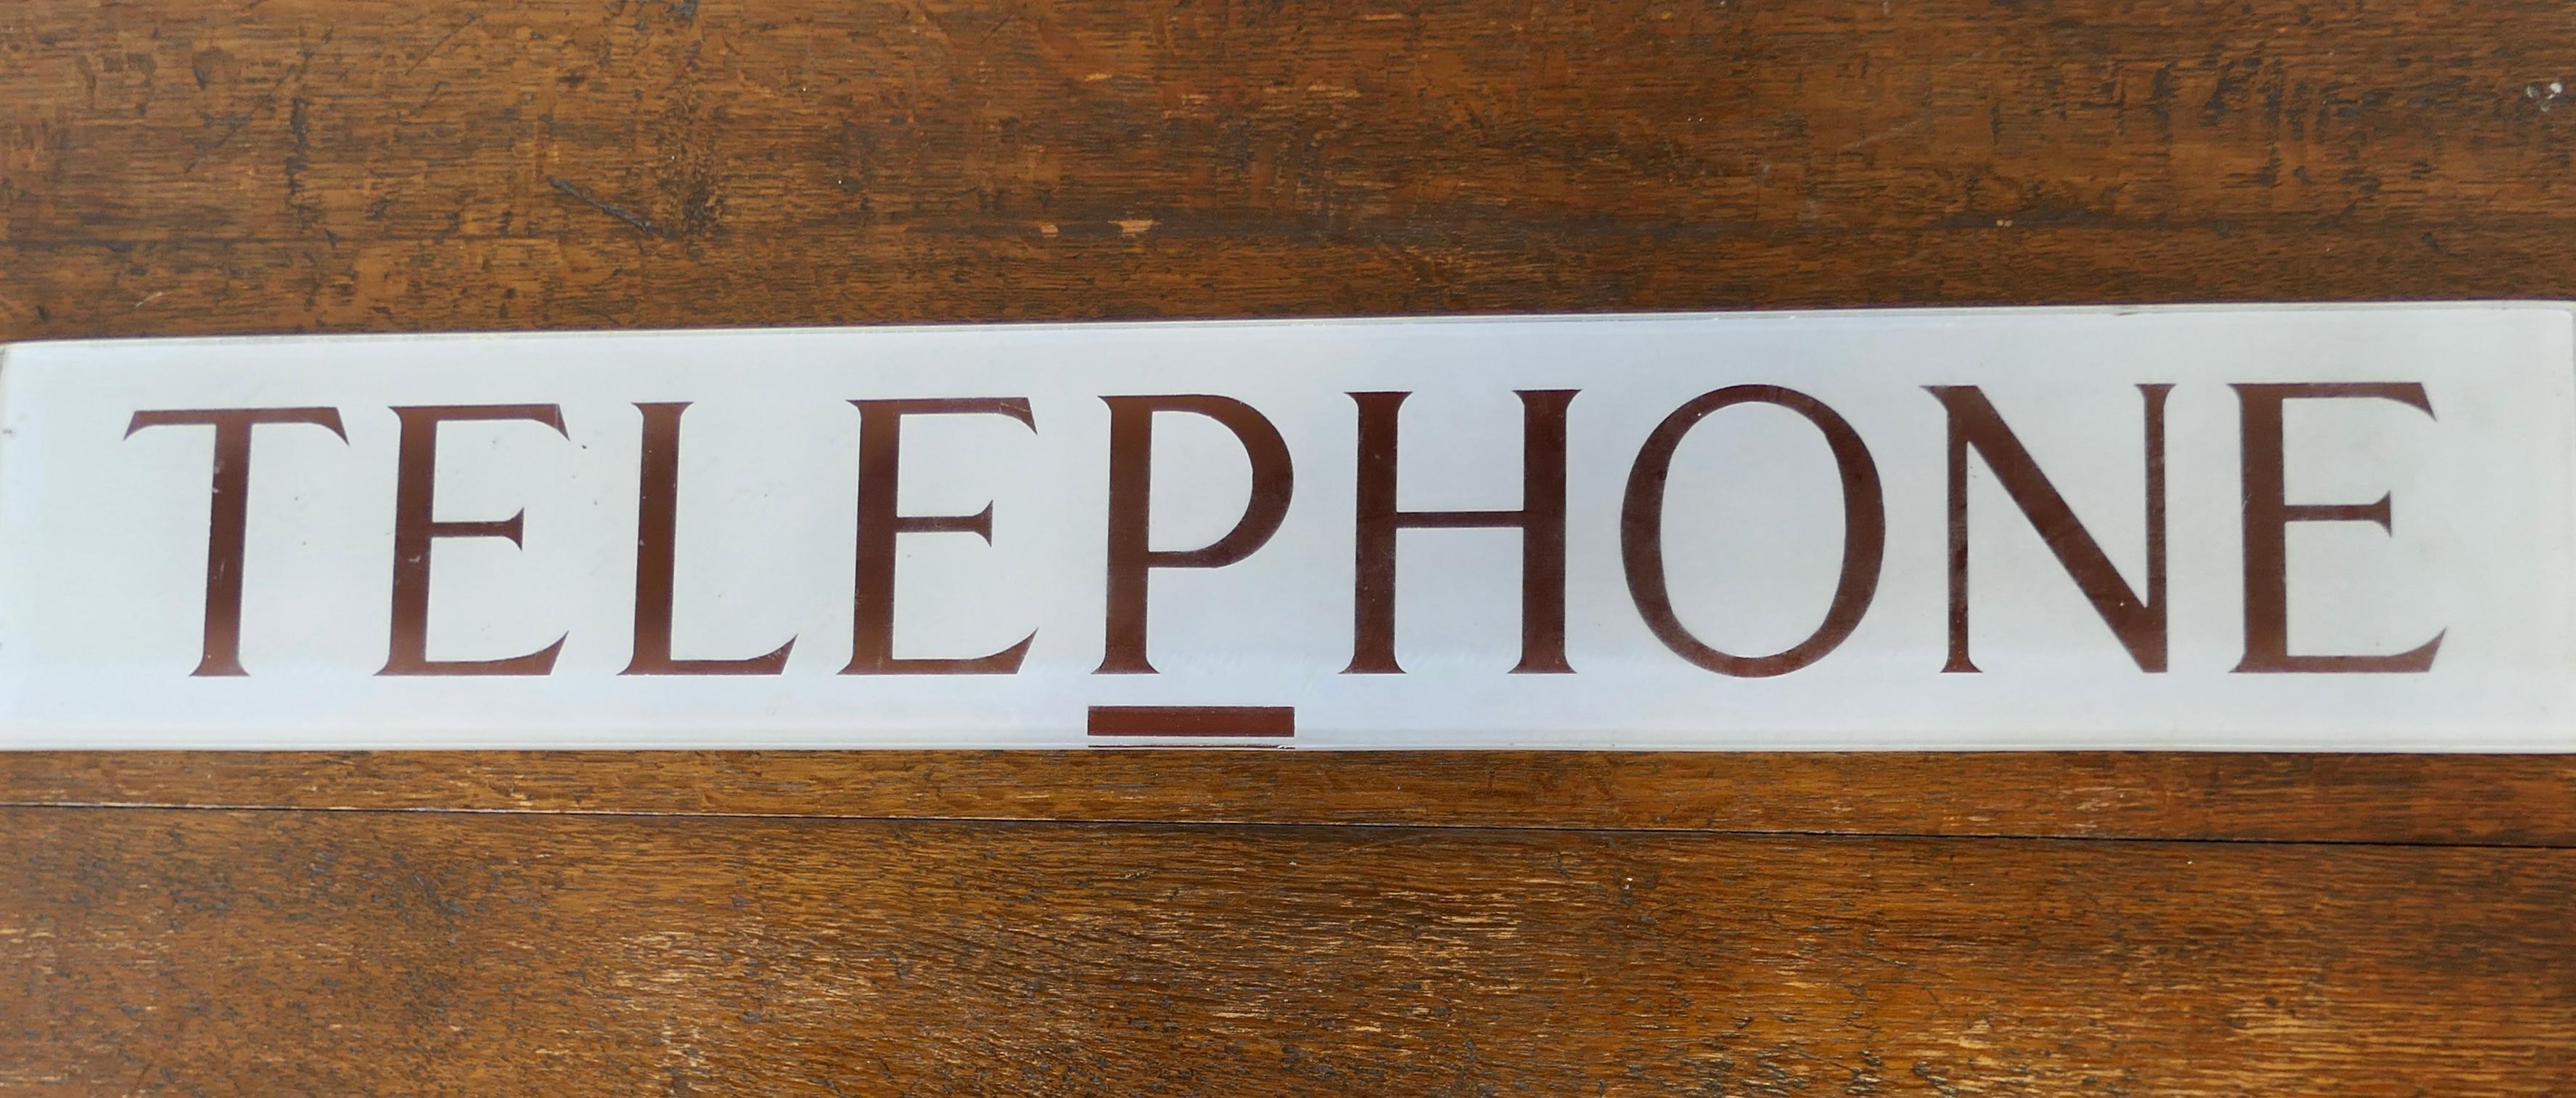 Original GPO Glass “TELEPHONE” sign from a Red Phone Box

From the 1950s the thick glass Telephone sign is in good original Condition

The sign is 4” high and 25” long
FB241
